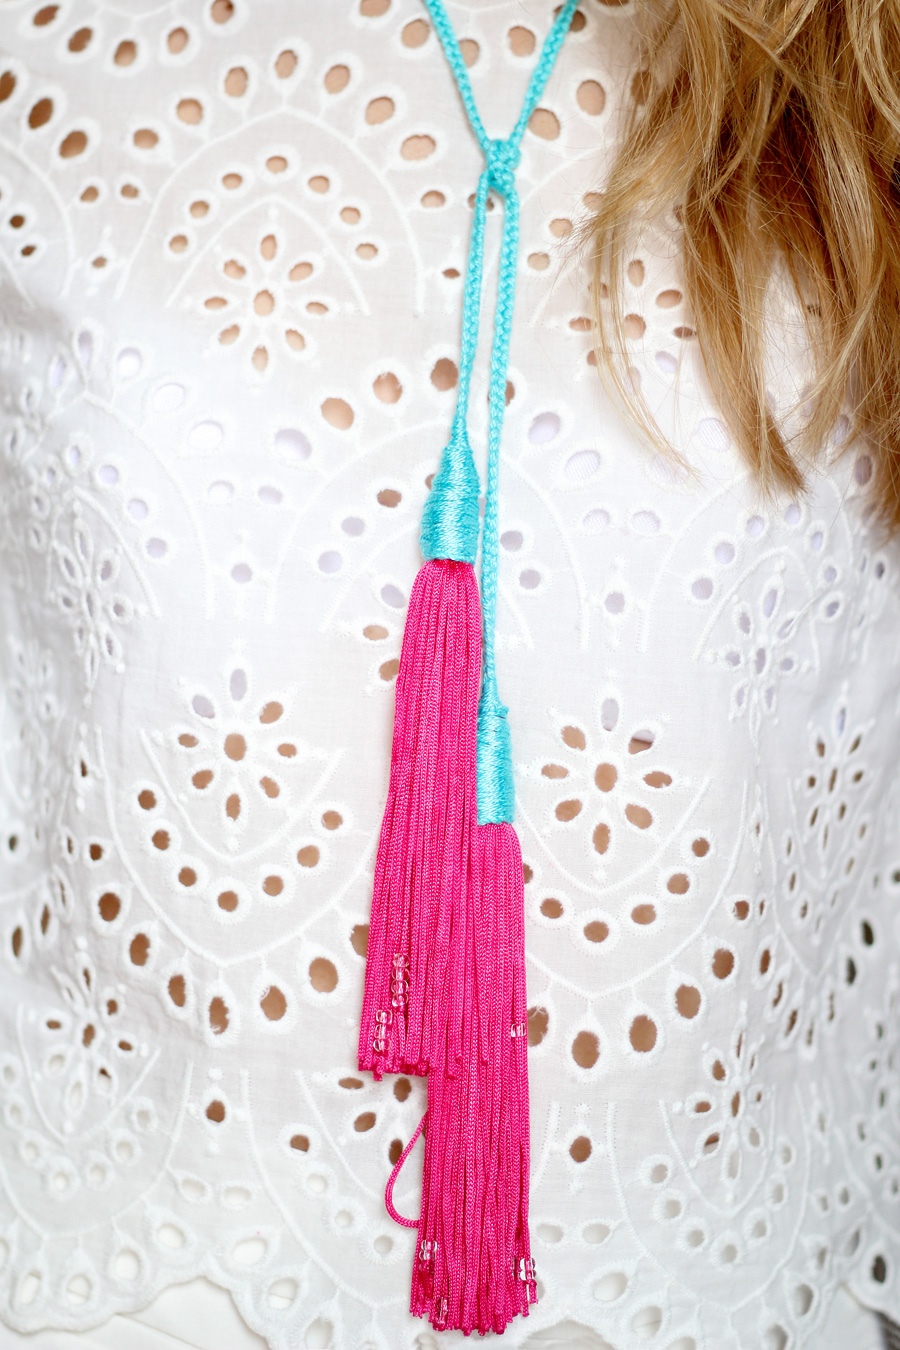 DIY braided tassel necklace tutorial, colorful summer accessories